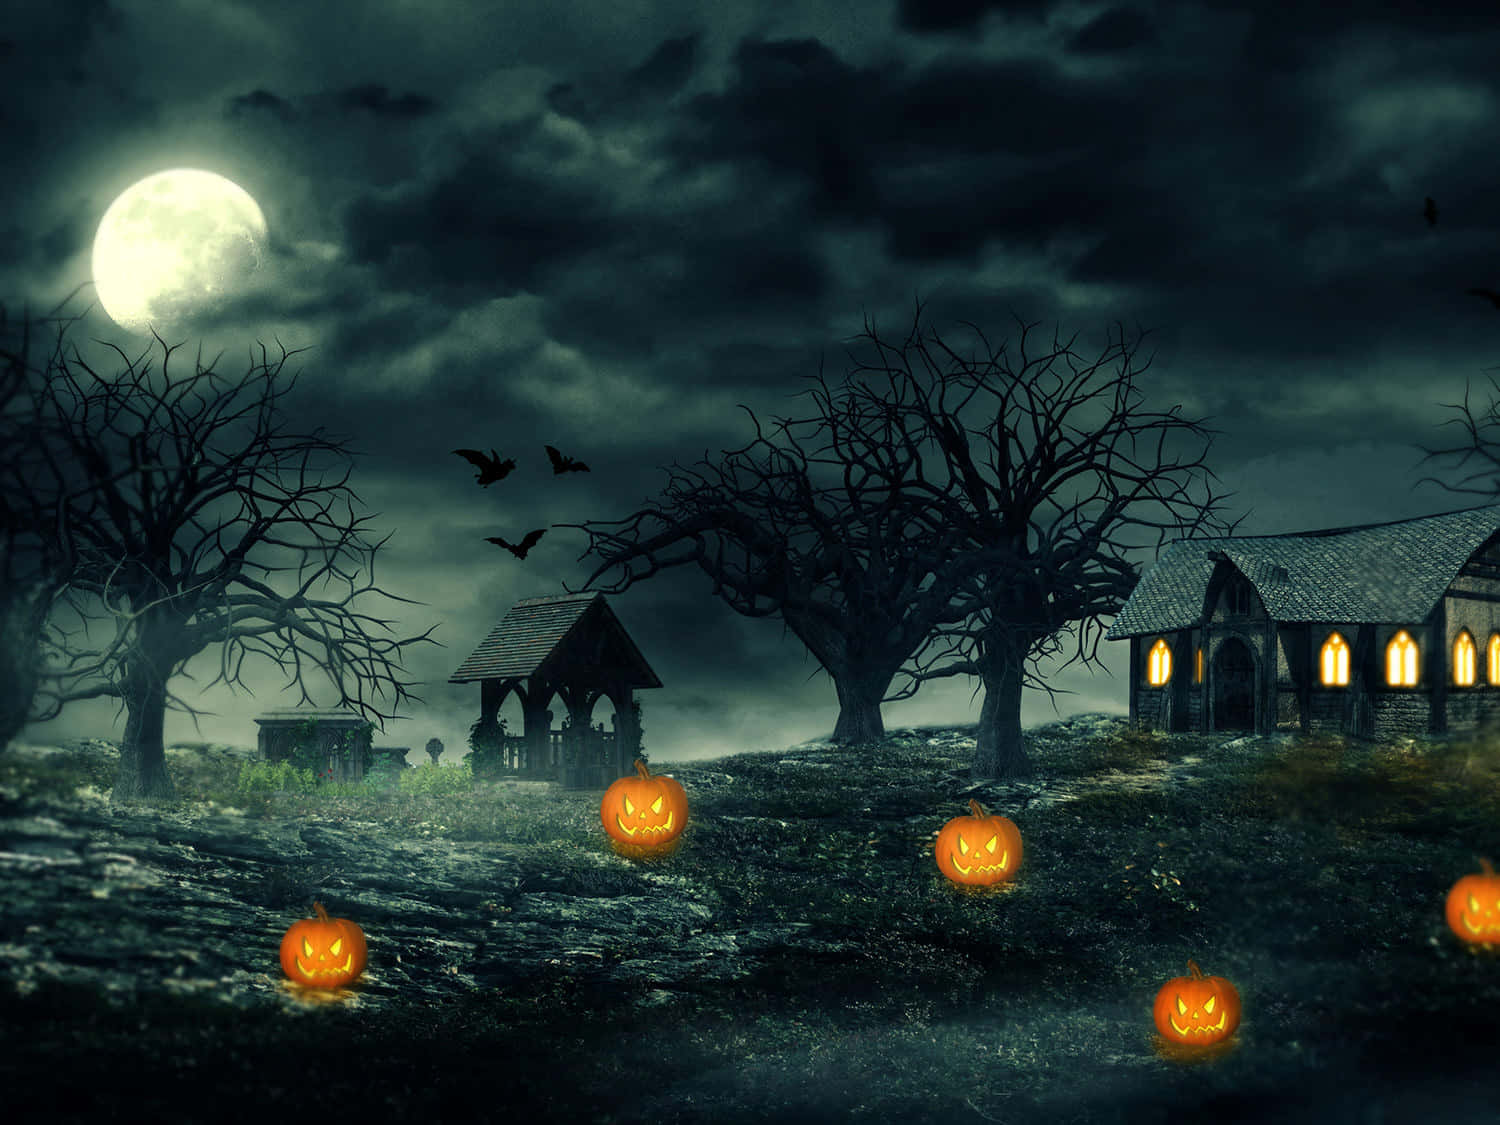 Download Make your profile spooky for Halloween | Wallpapers.com